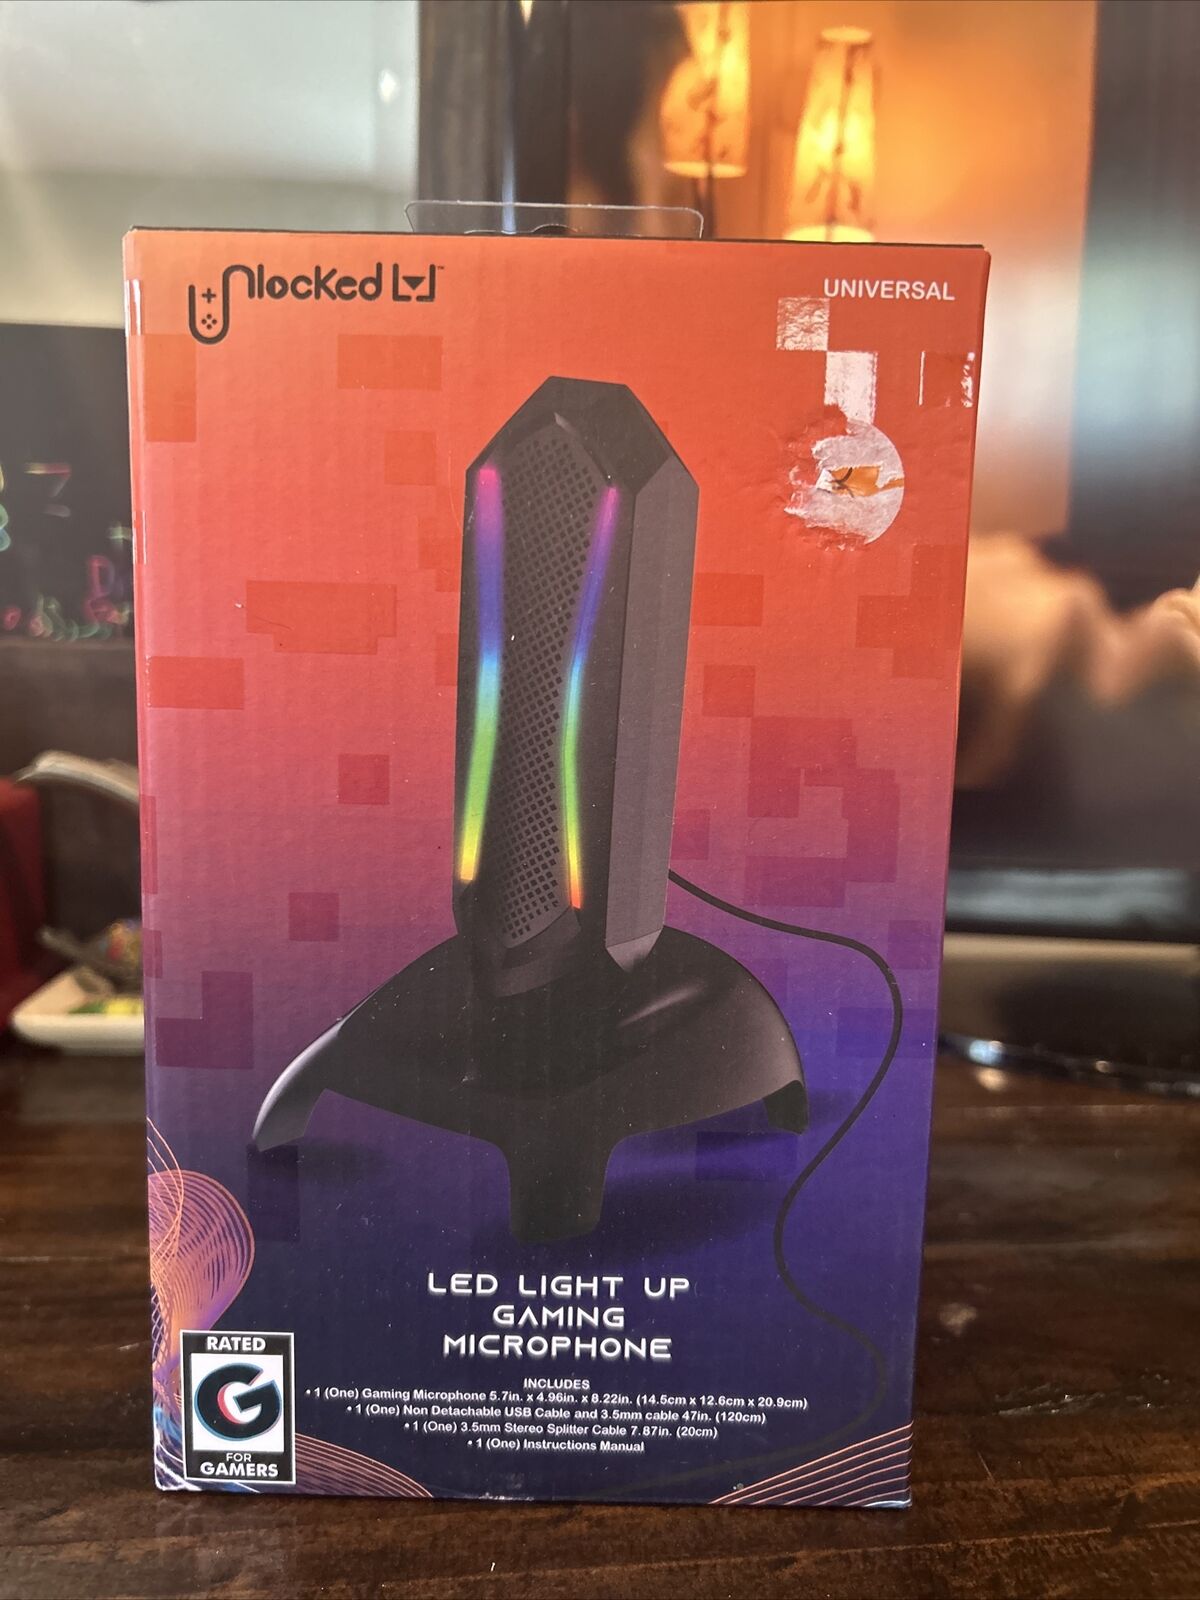 LED Light Up Gaming Microphone